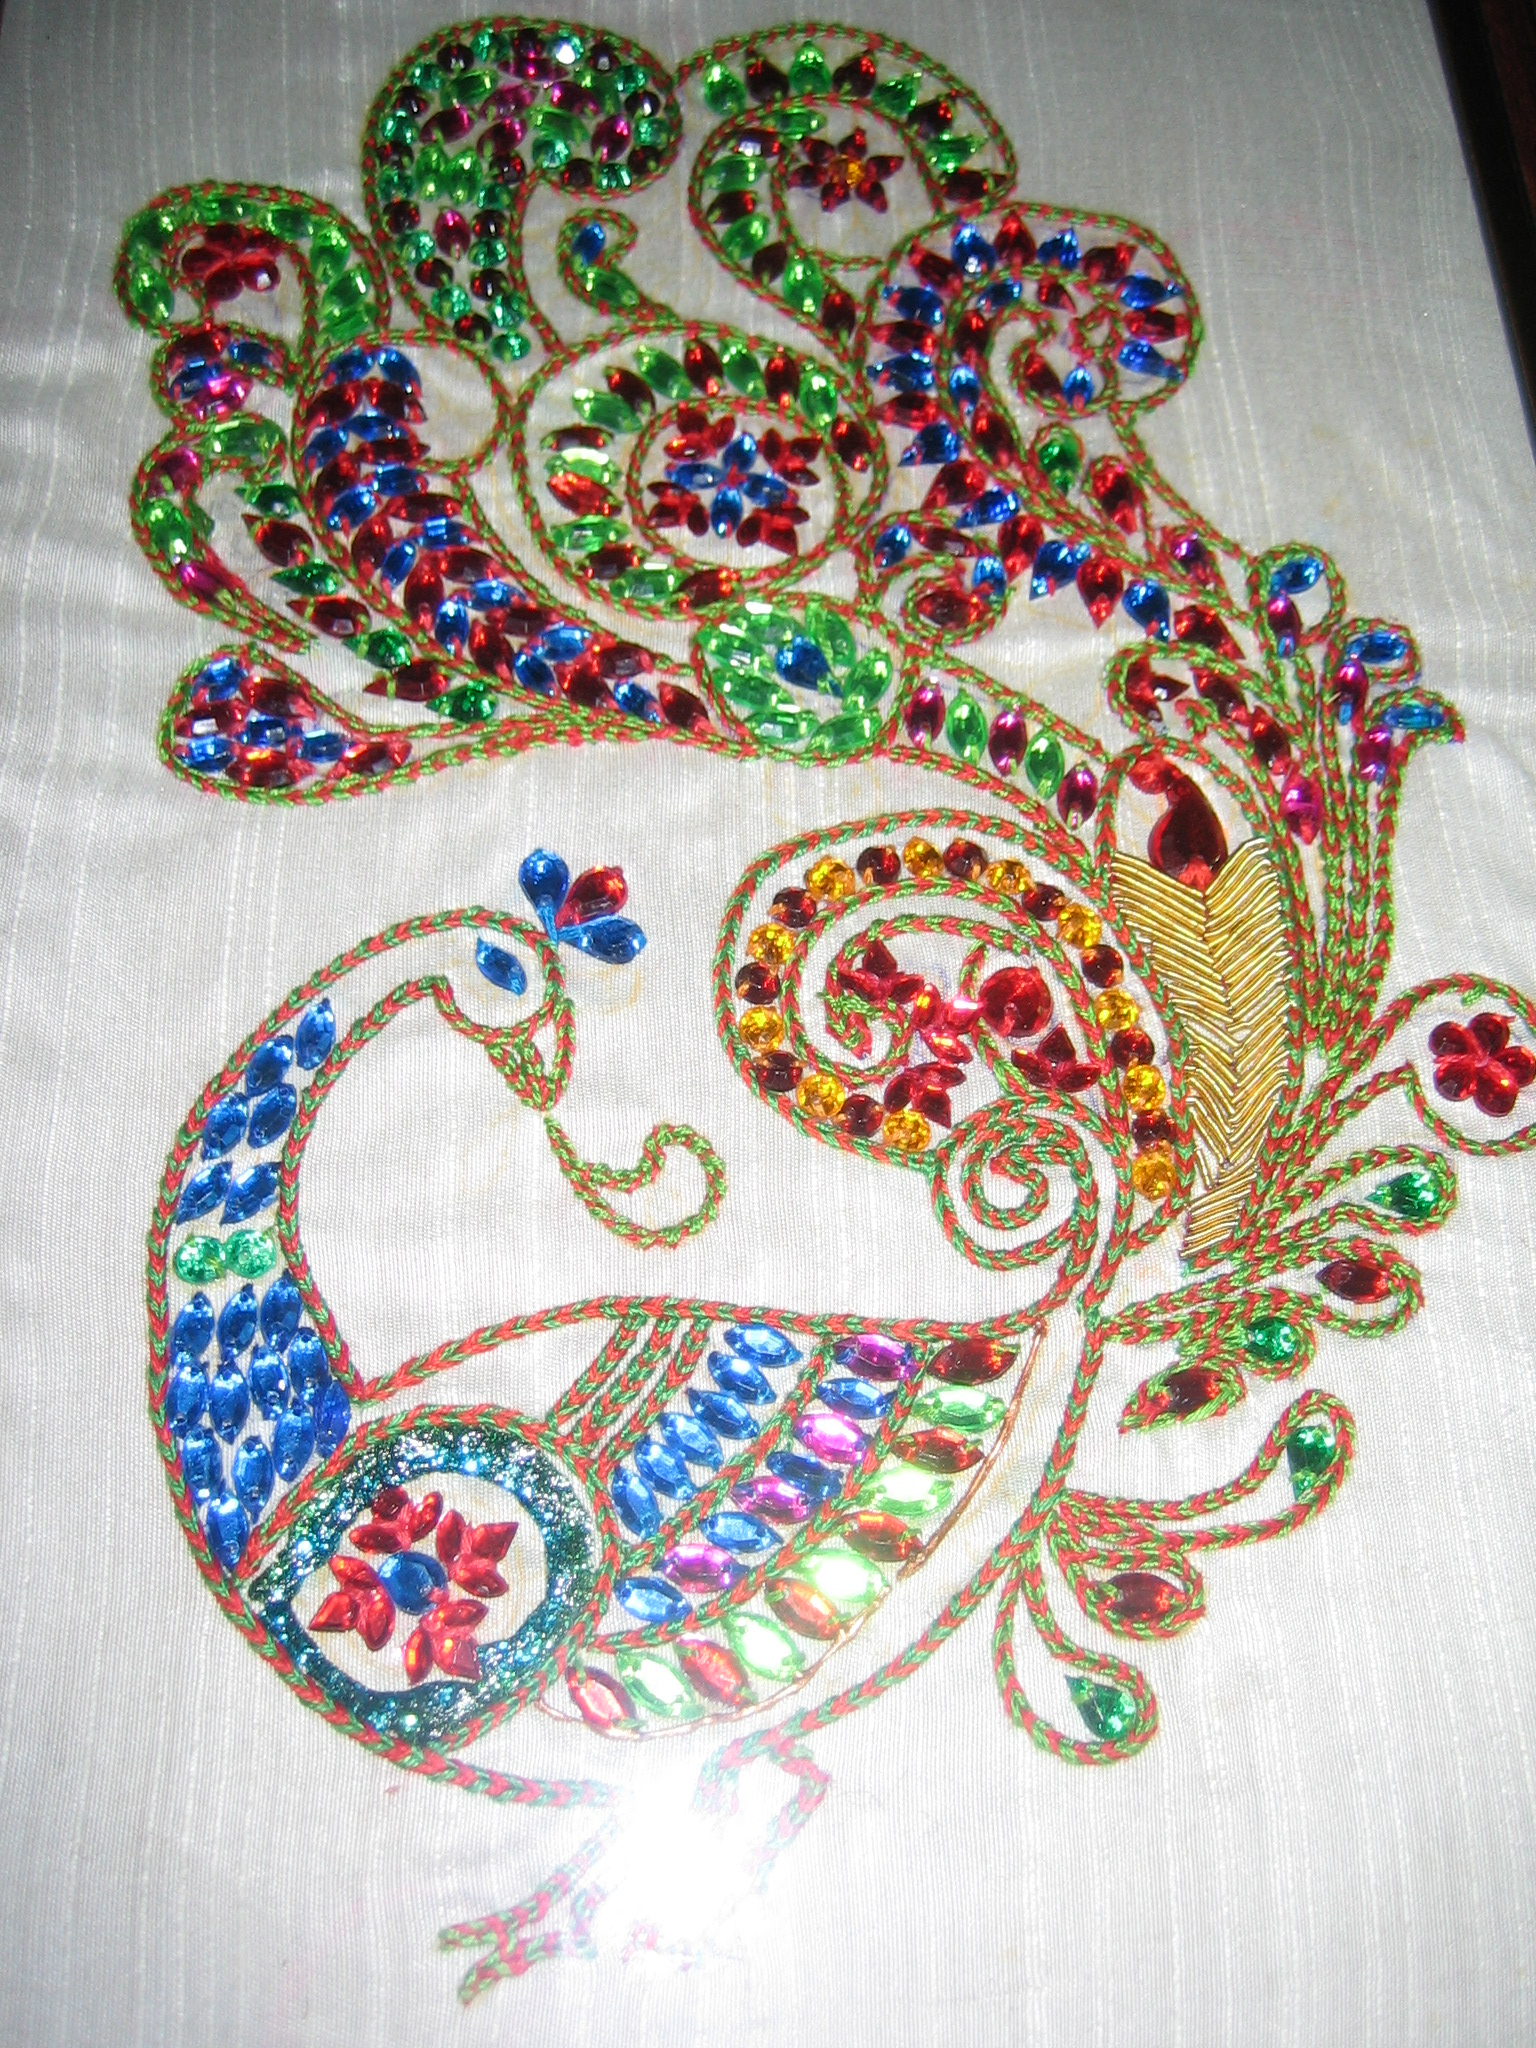 Stone Embroidery Patterns Embroidery Welcome To My Blog Page 7